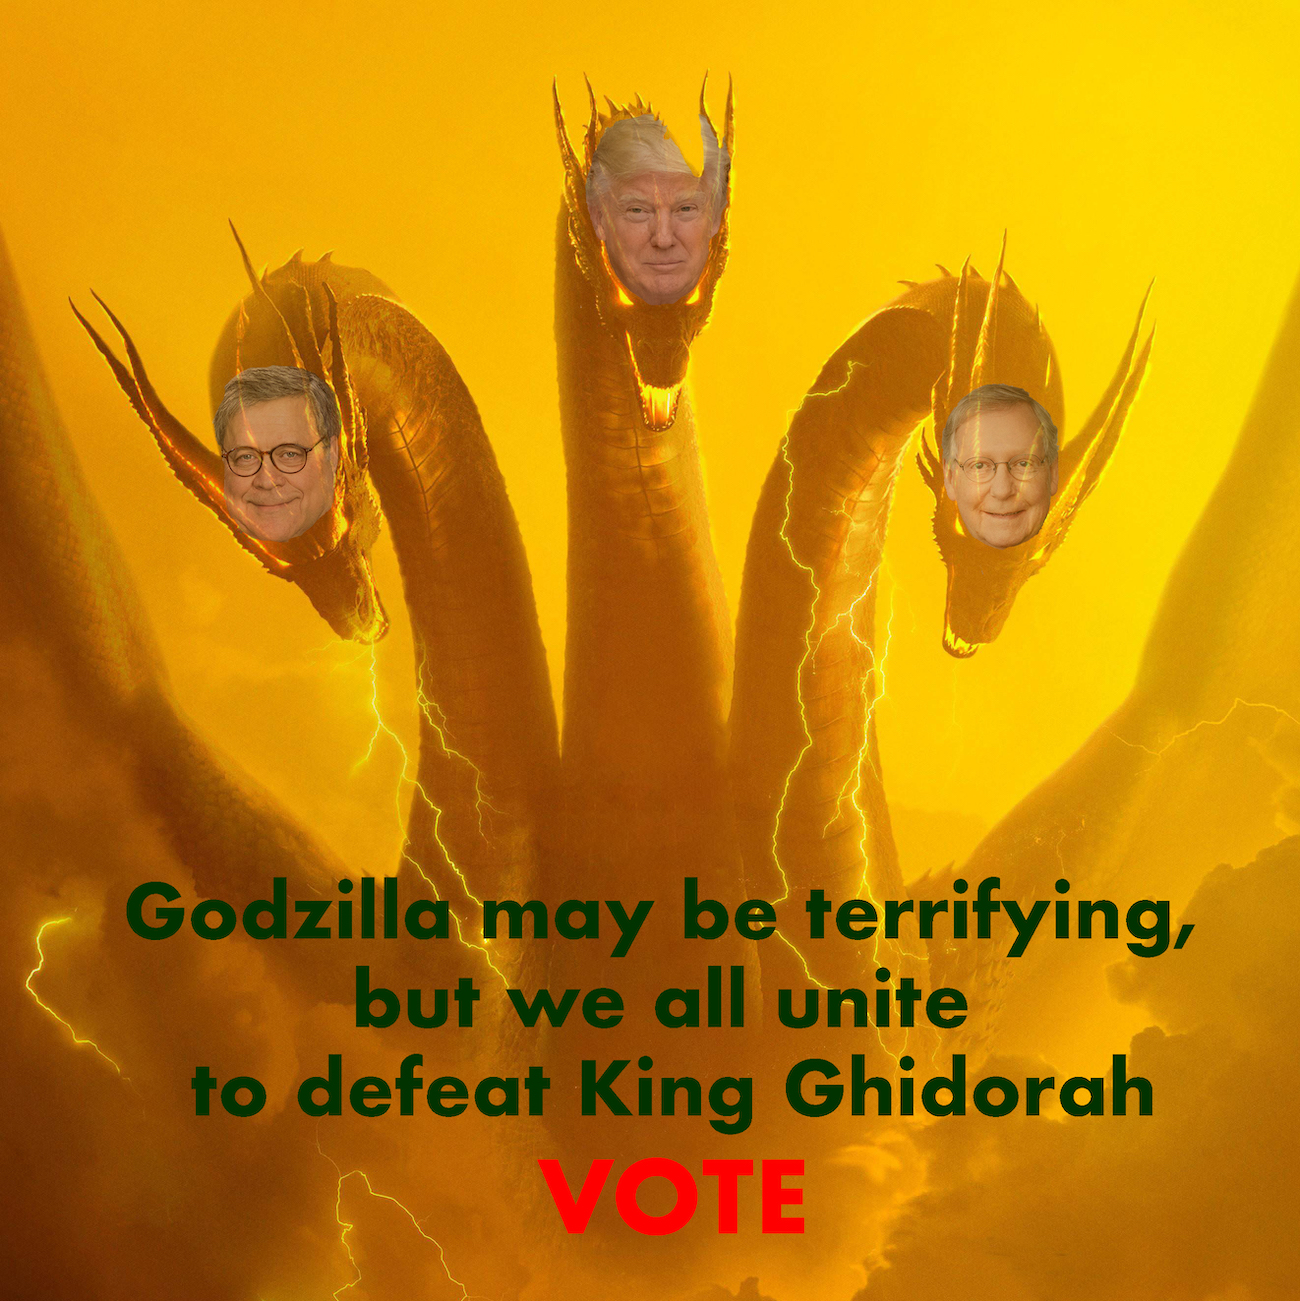 Godzilla may be terrifying, but we all unite to defeat King Ghidorah.